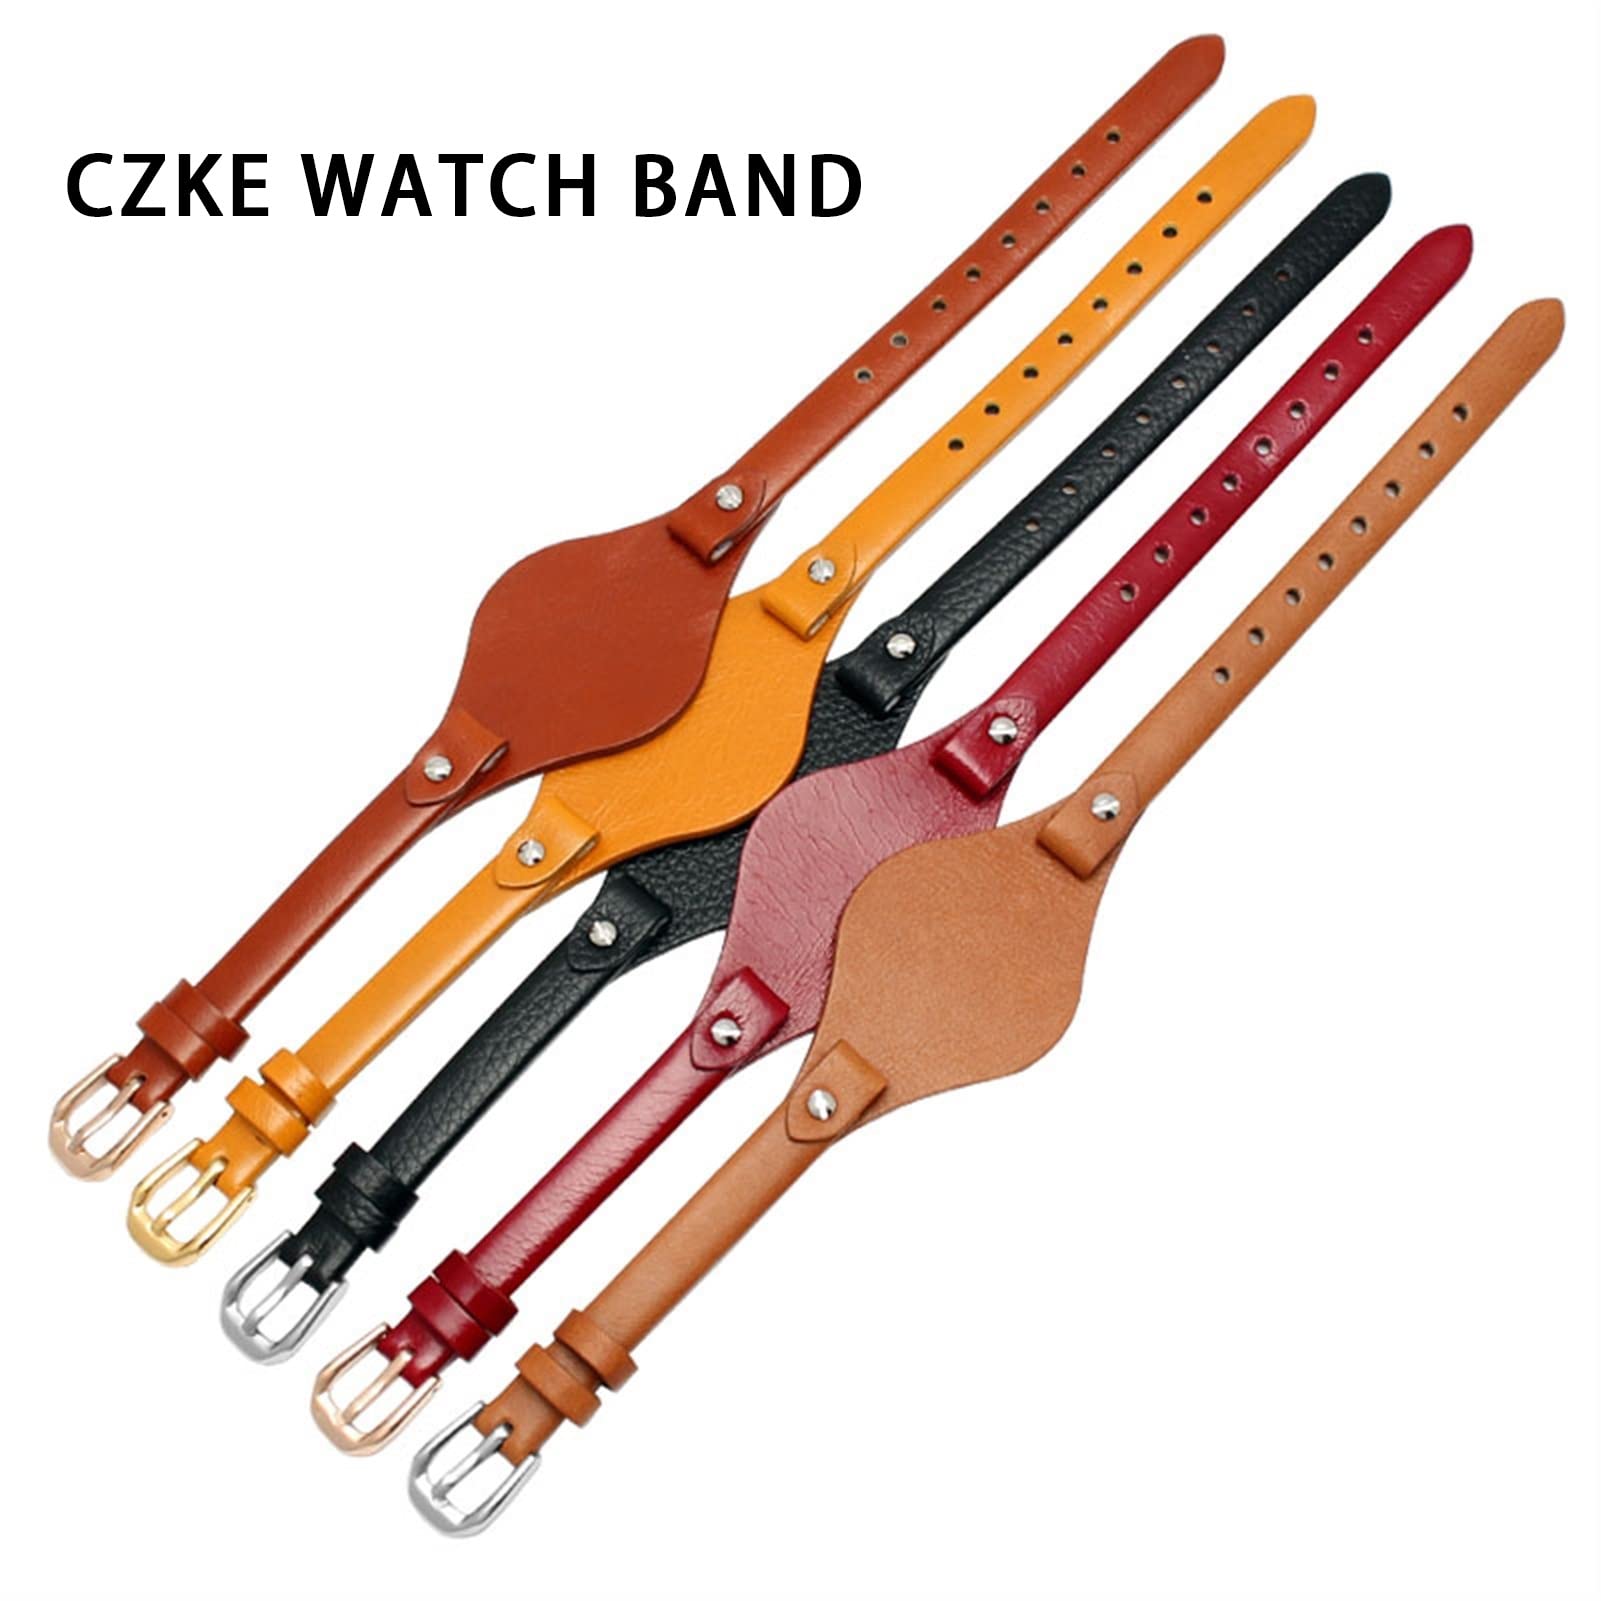 Wscebck Genuine Leather Watchbands for Fossil ES3077 ES2830 ES3262 ES3060 Stylish Women Watch Straps Small Bracelet (Color : Coffee, Size : 8mm Rose Gold Clasp)